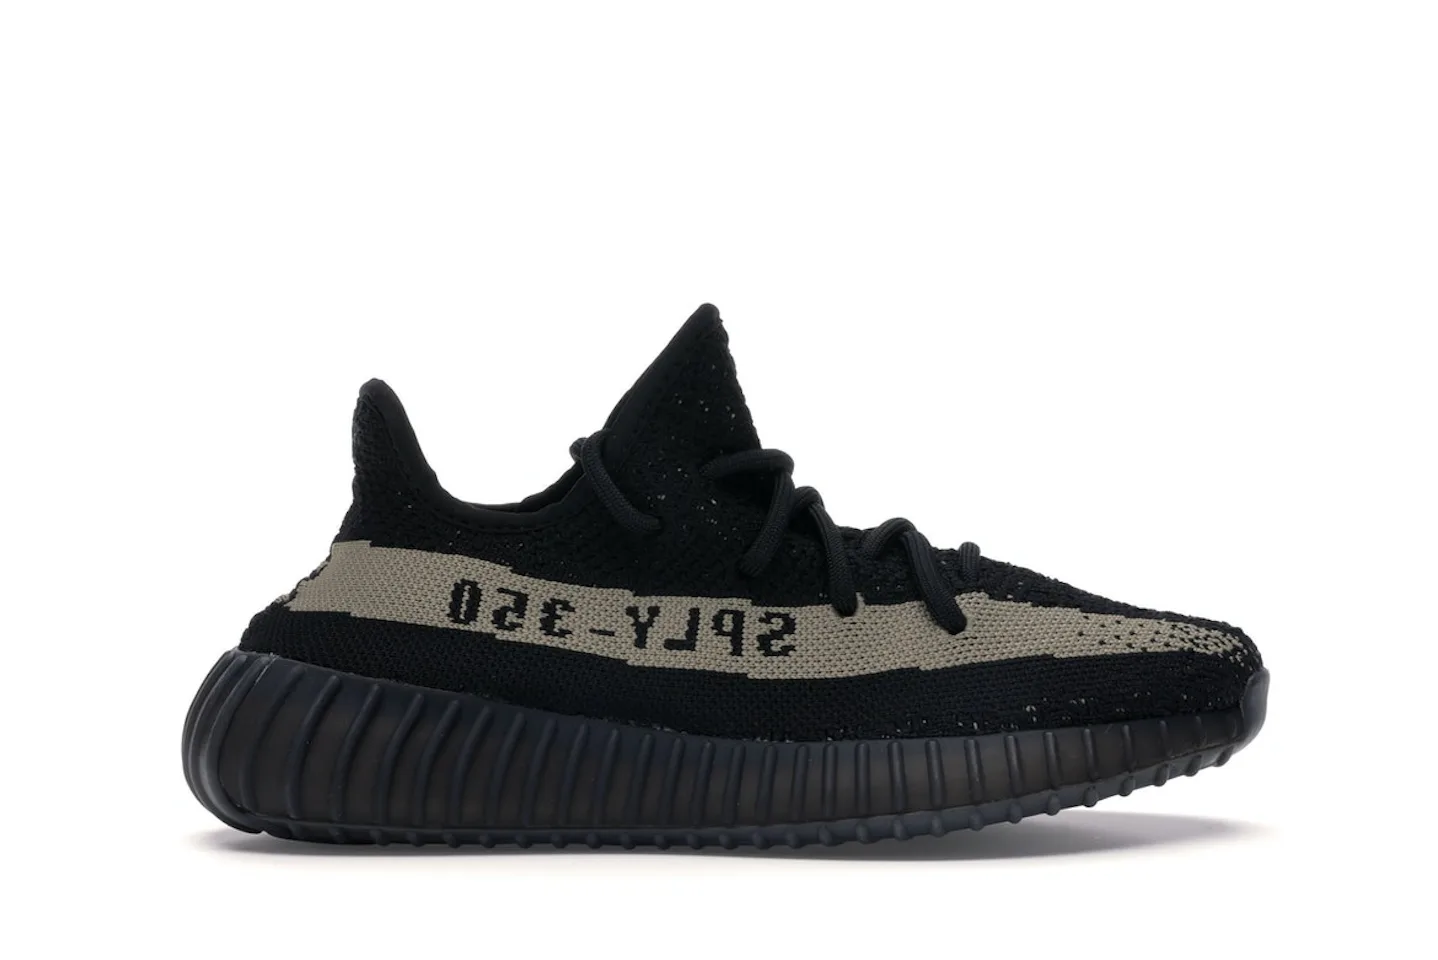 adidas Yeezy Boost 350 V2 Core Black Green - BY9611